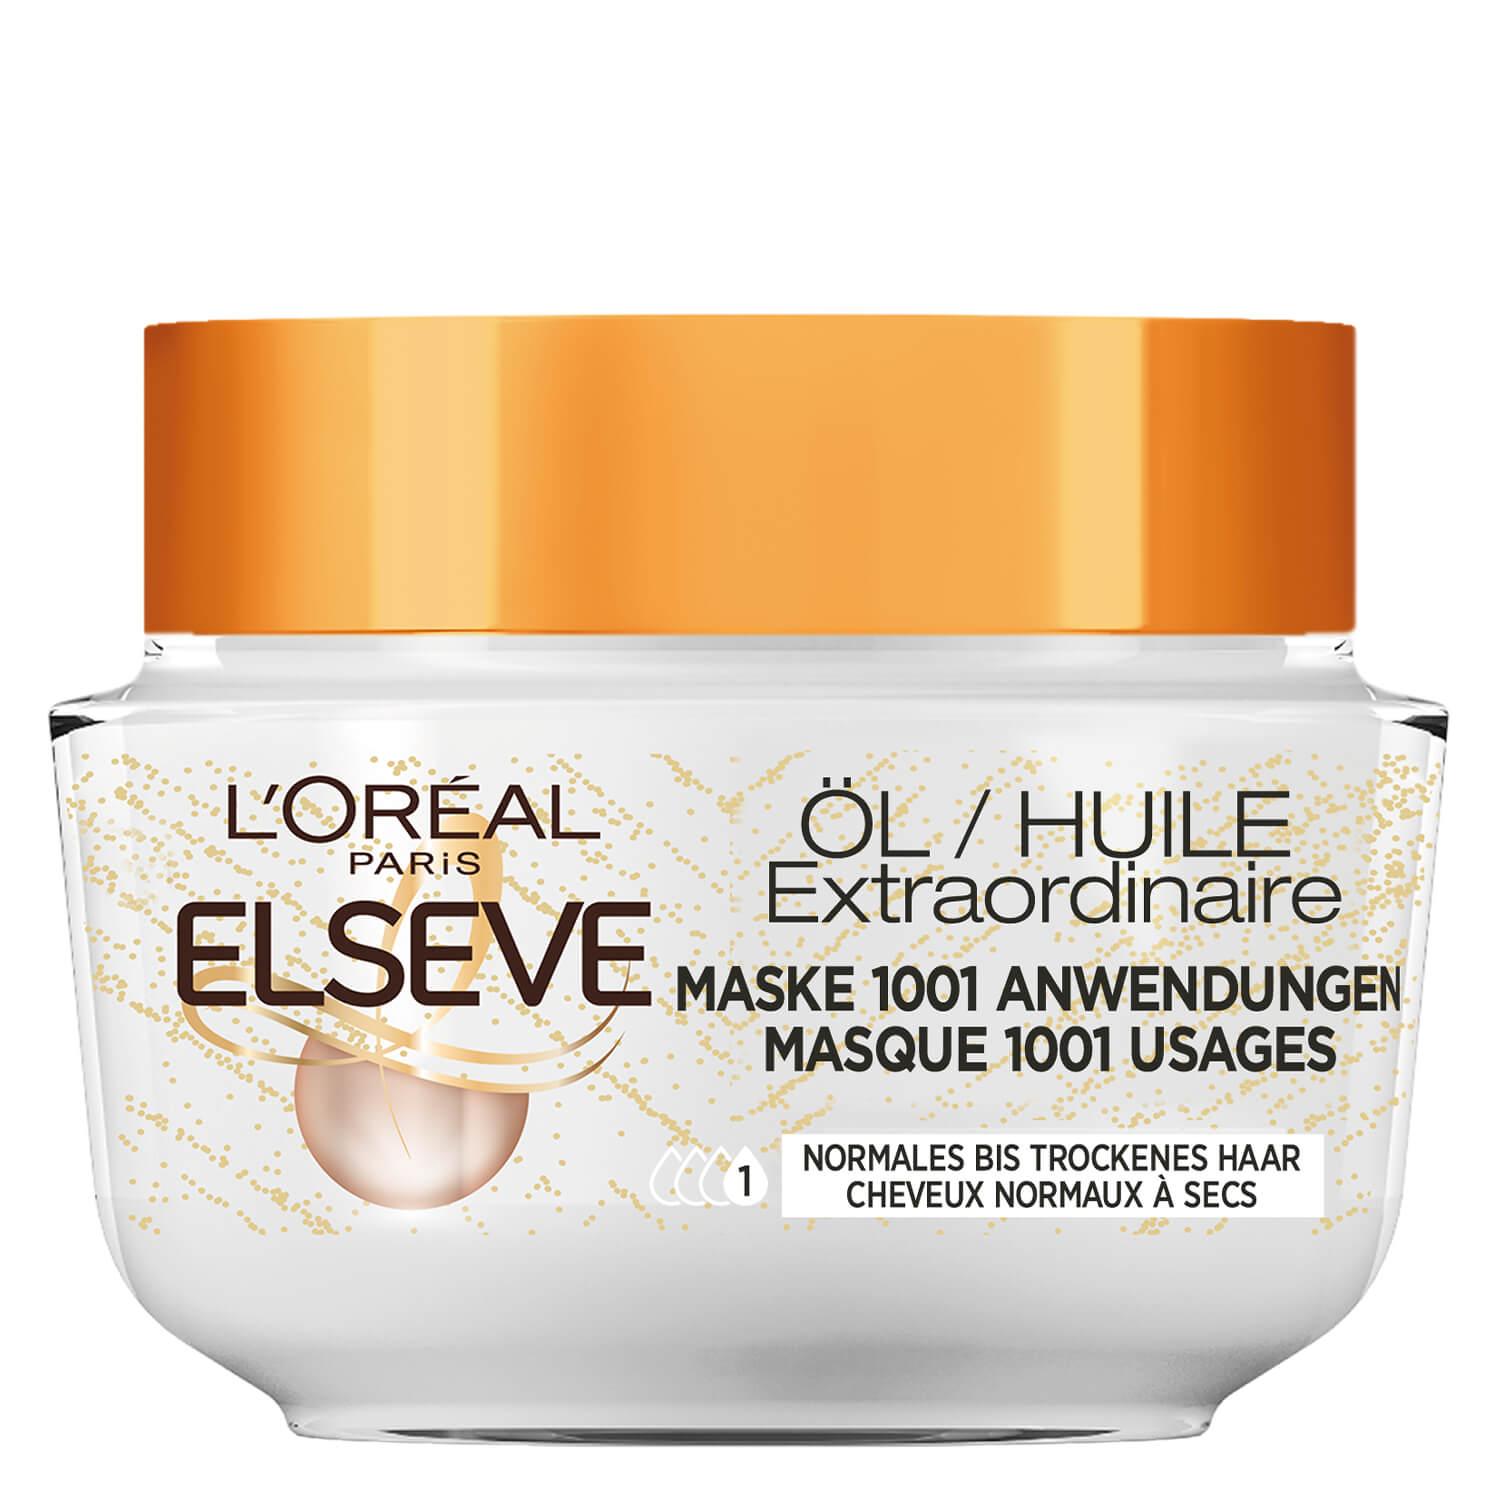 LOréal Elseve Haircare - Oil Extraordinaire Mask with 1001 applications